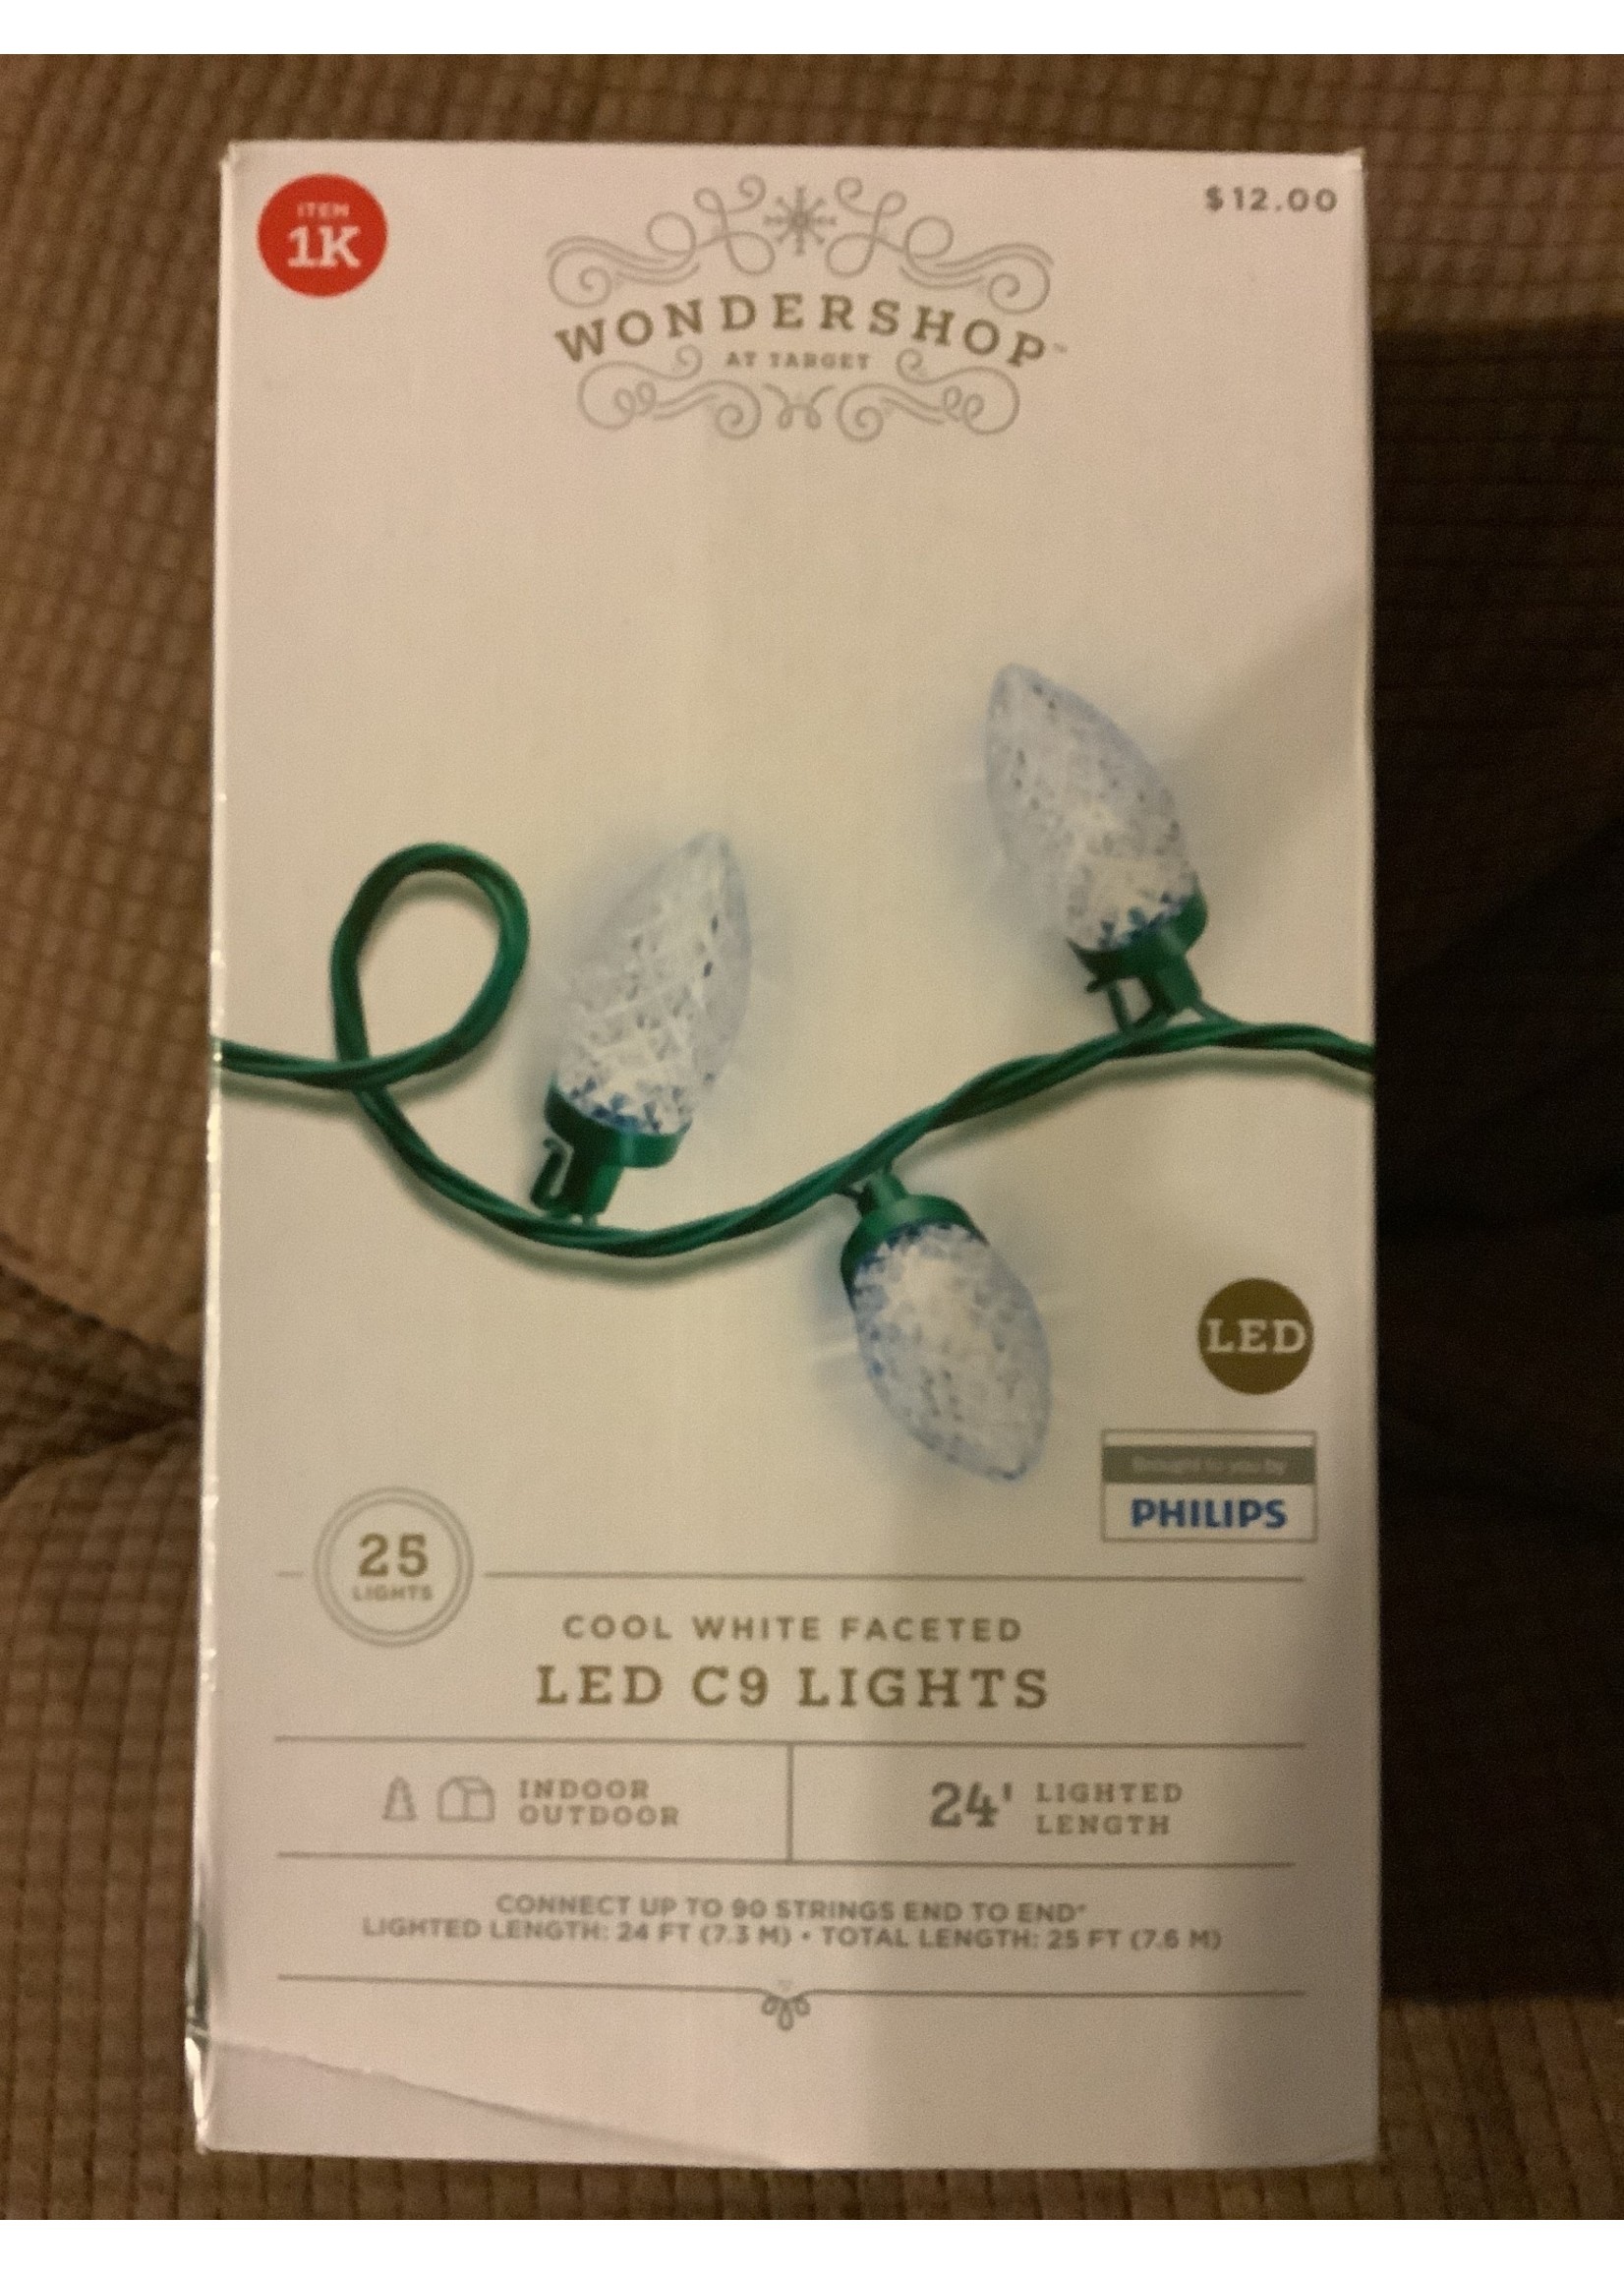 25ct LED C9 Faceted Christmas String Lights Cool White with Green Wire - Wondershop